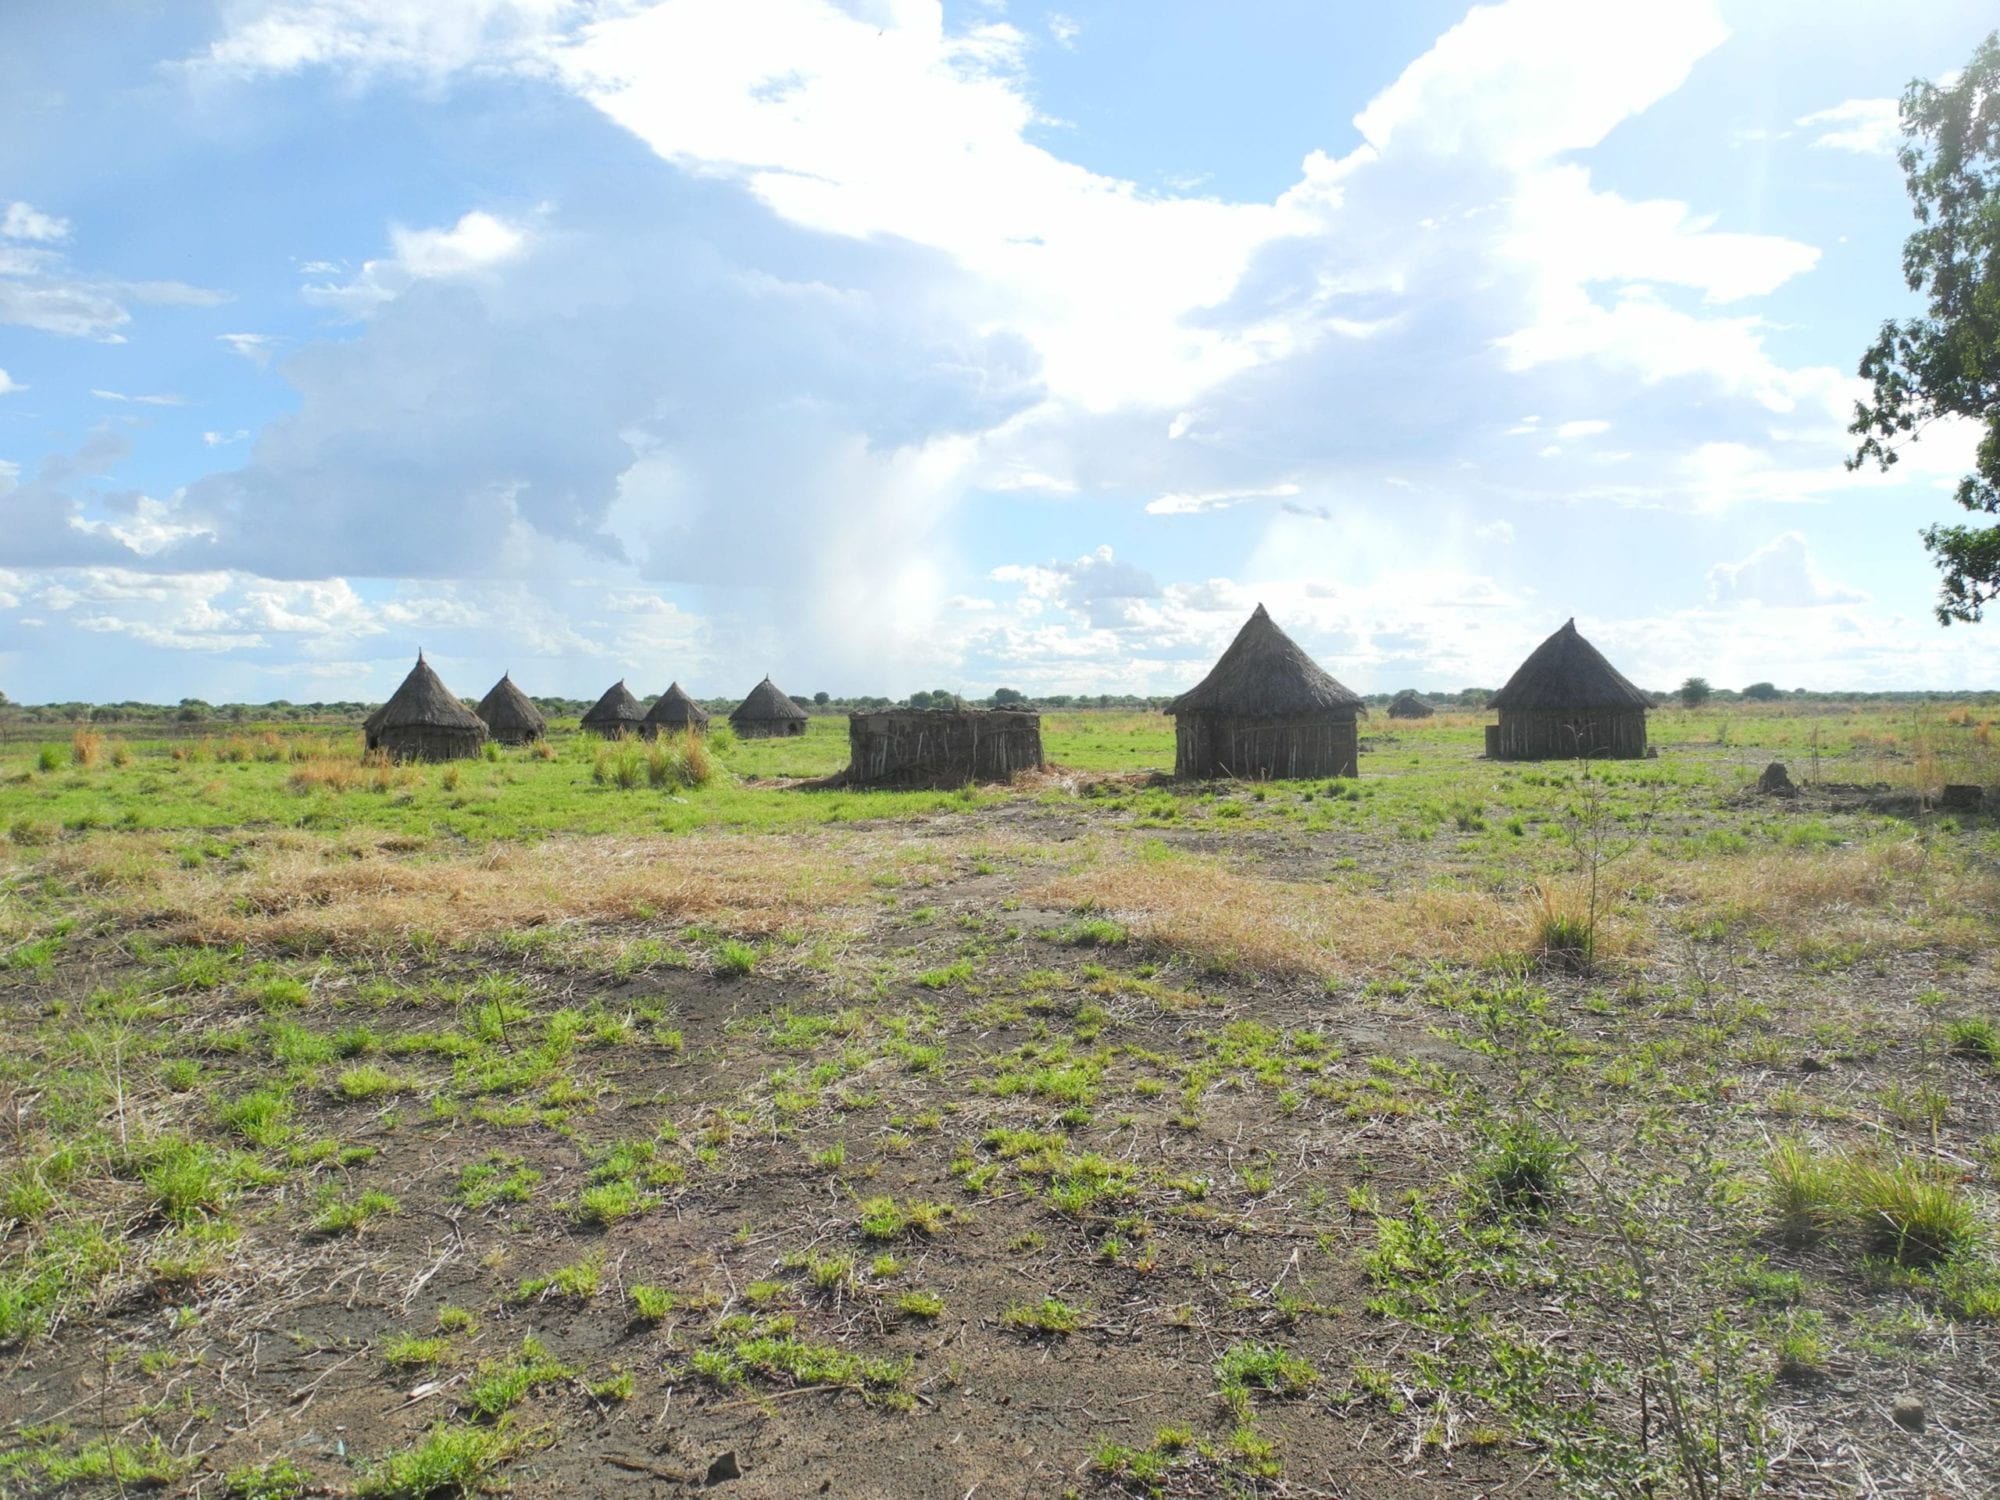 Abandoned new village in Gambella, Ethiopia © 2011 Human Rights Watch